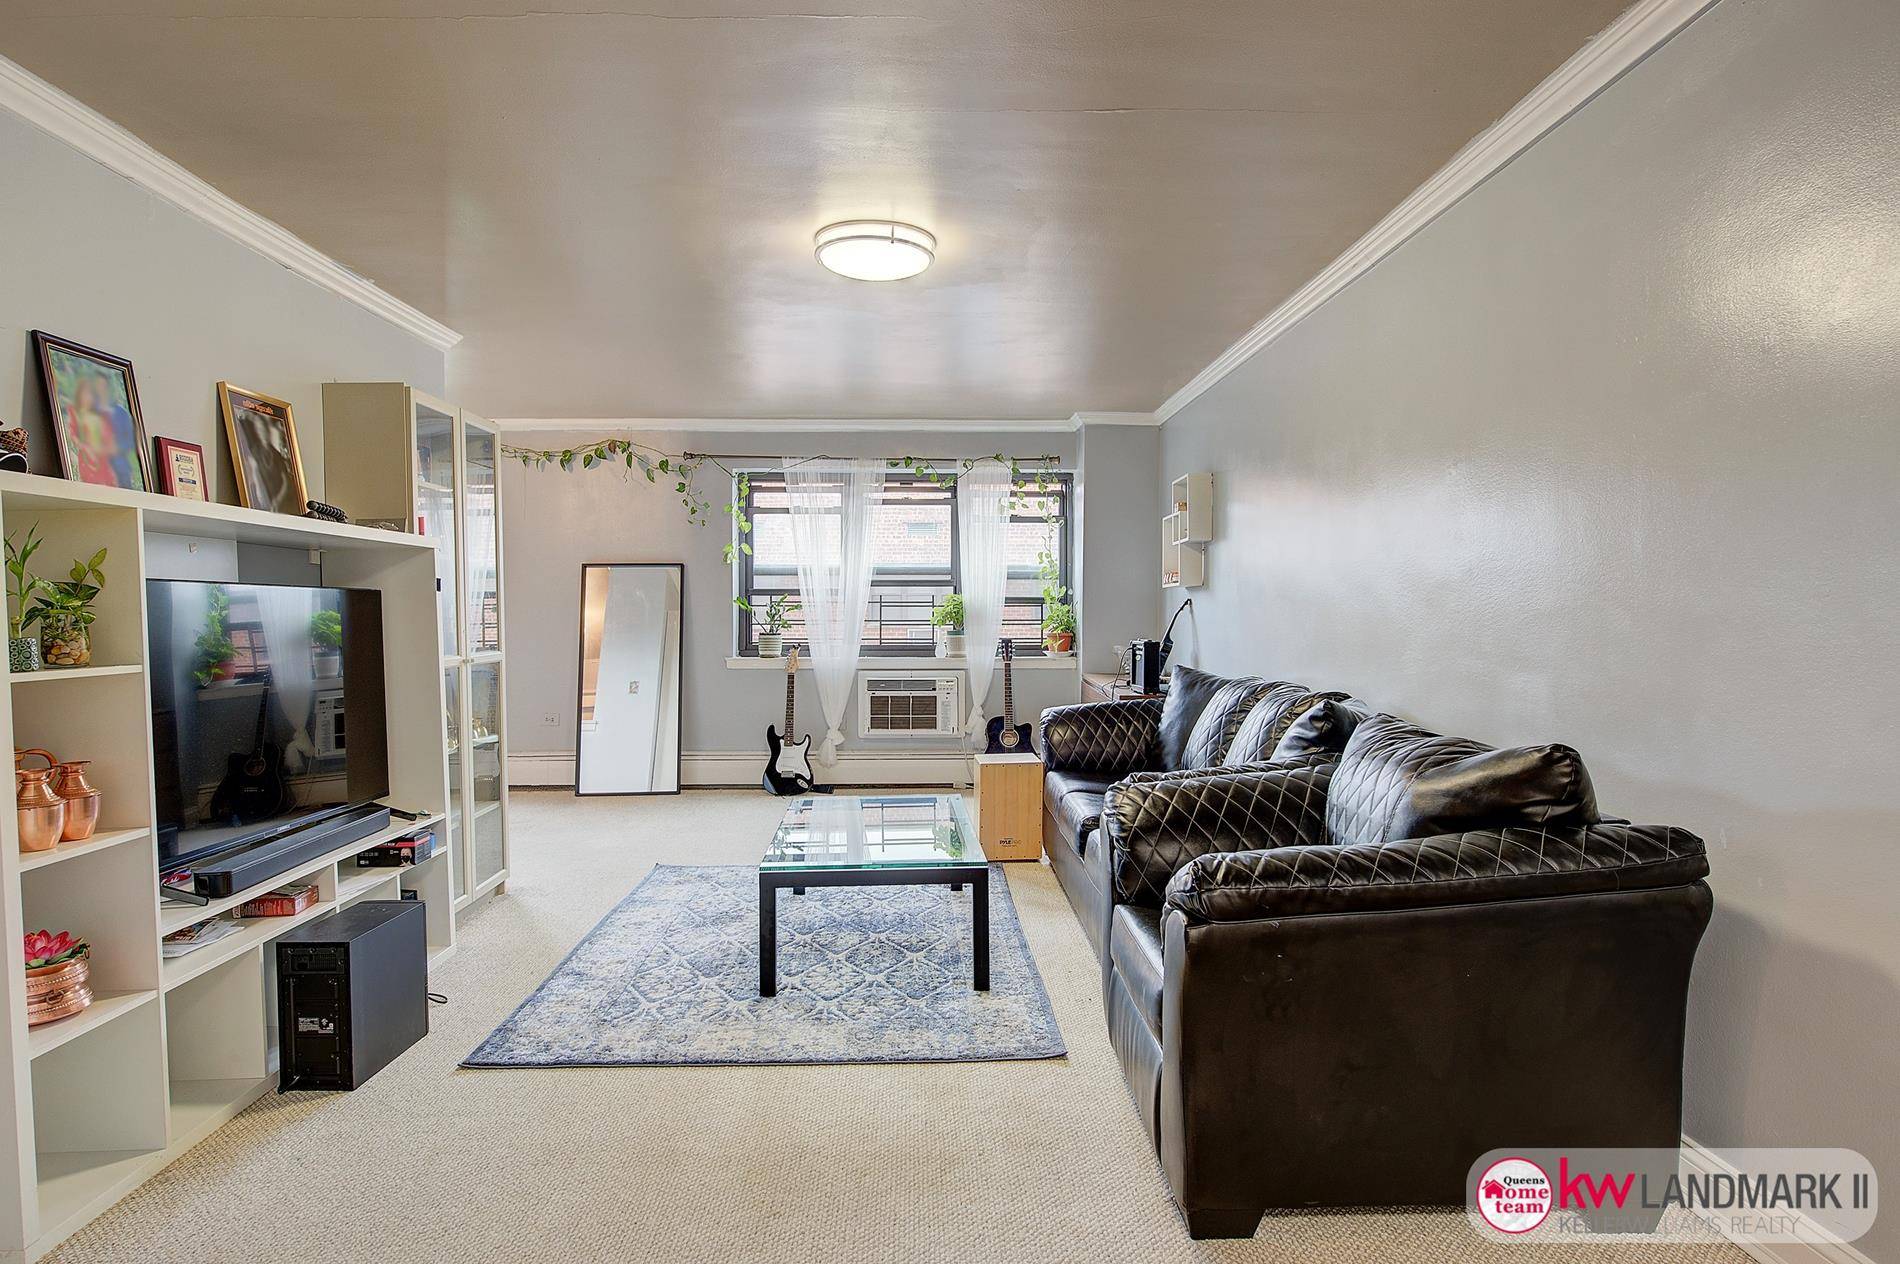 3bd 2ba apartment with formal foyer in entryway, en suite bathroom, large bedrooms, walk through galley style kitchen, separate dining area, lots of windows and plenty of space and light ...